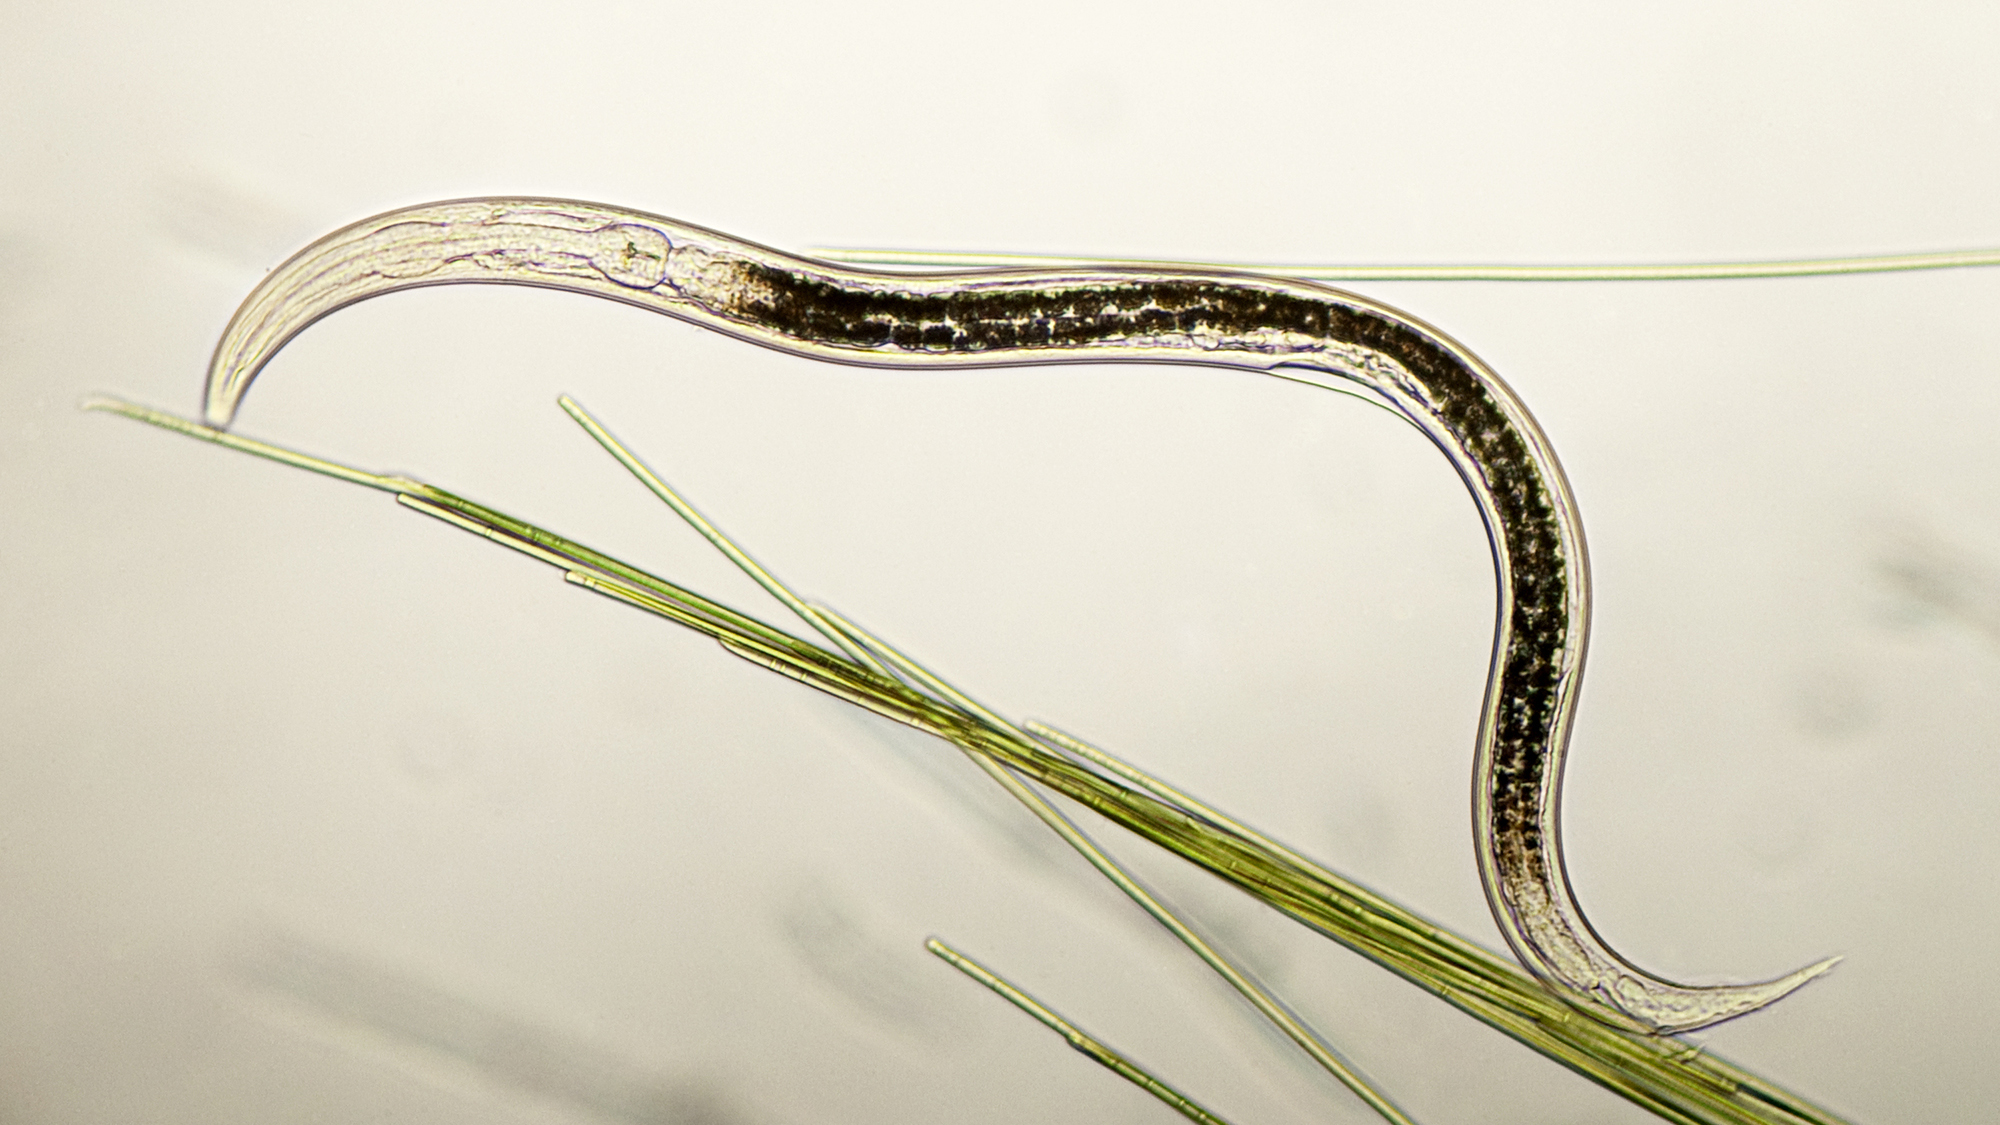 An aquatic nematode living in pond water among cyanobacteria. The small worms are sometimes trapped and eaten by carnivorous fungi.